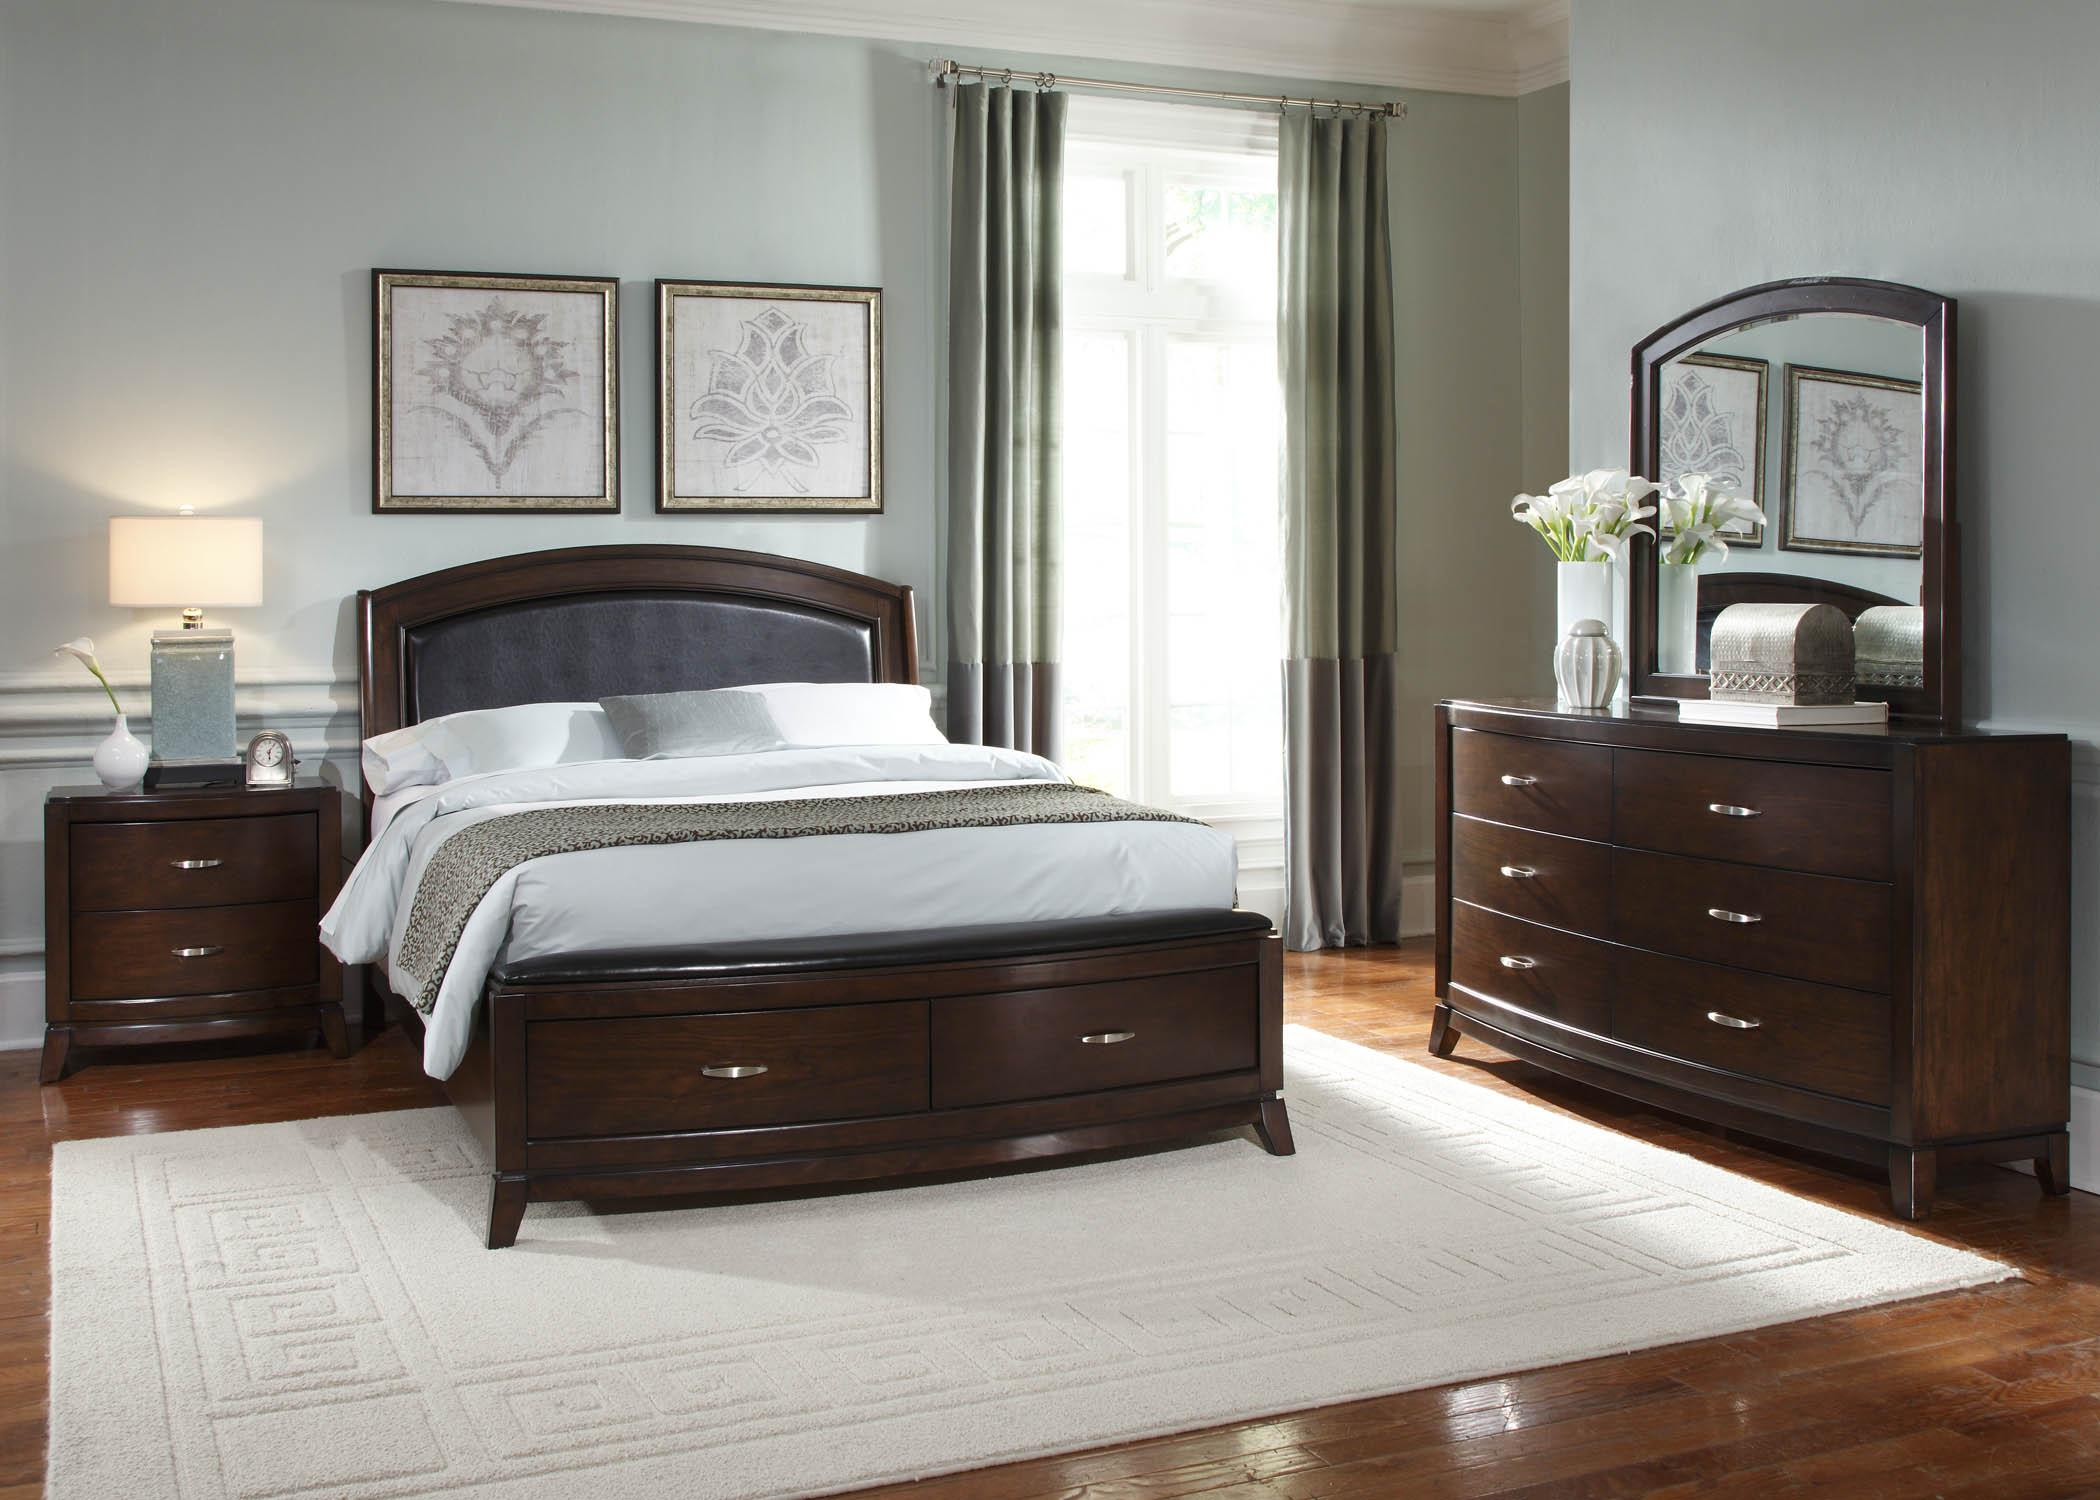 Avalon Queen Bedroom Group 3 Liberty Furniture At Royal Furniture regarding size 2100 X 1500